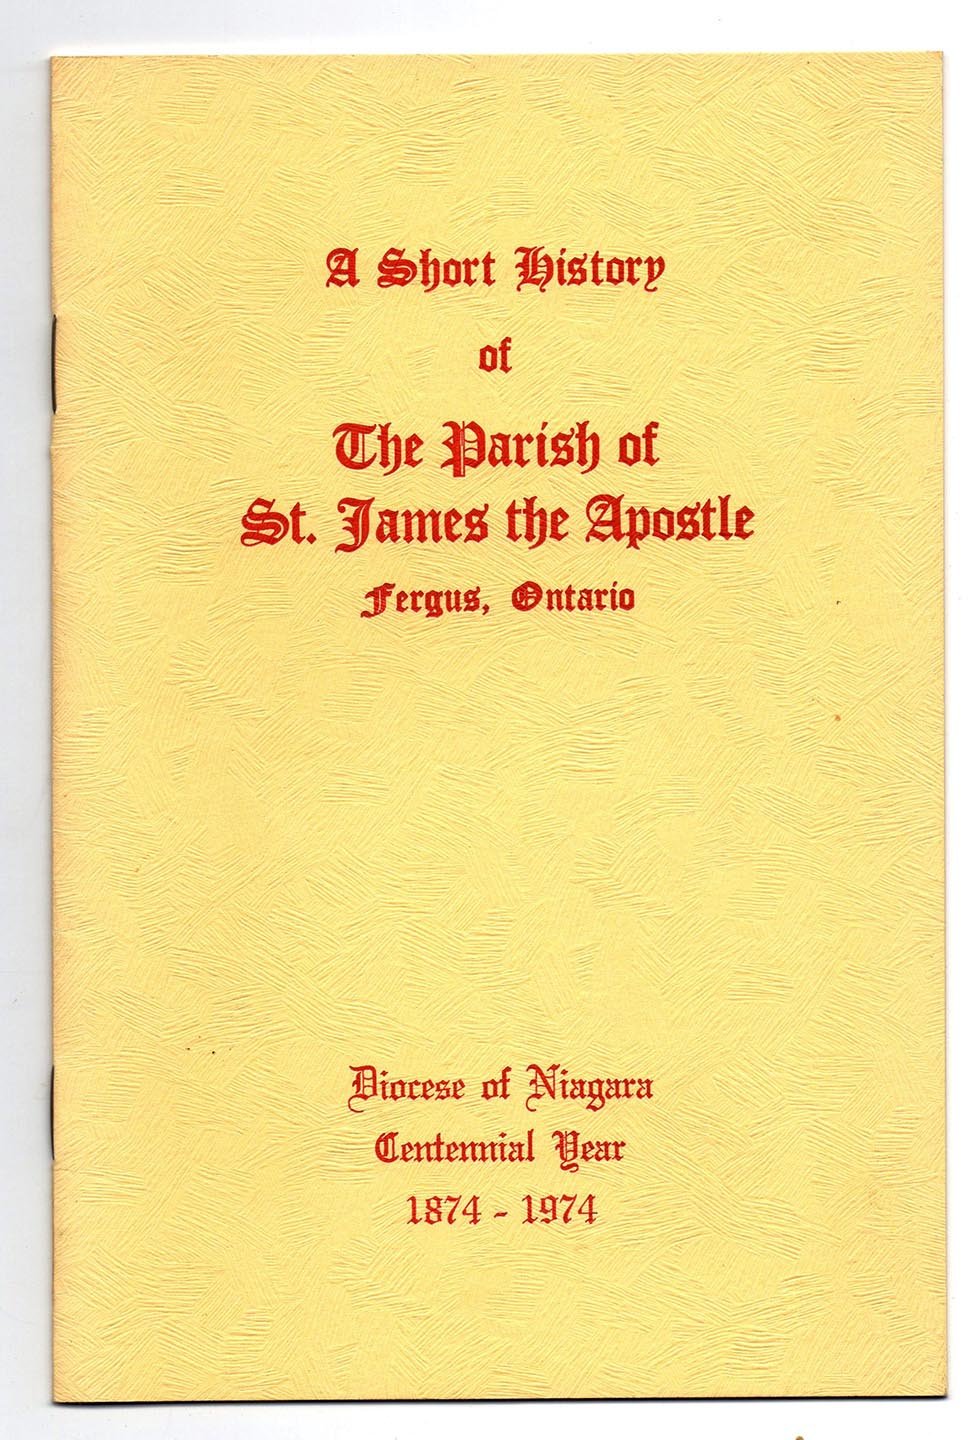 A Short History of The  Parish of St. James the Apostle, Fergus, Ontario